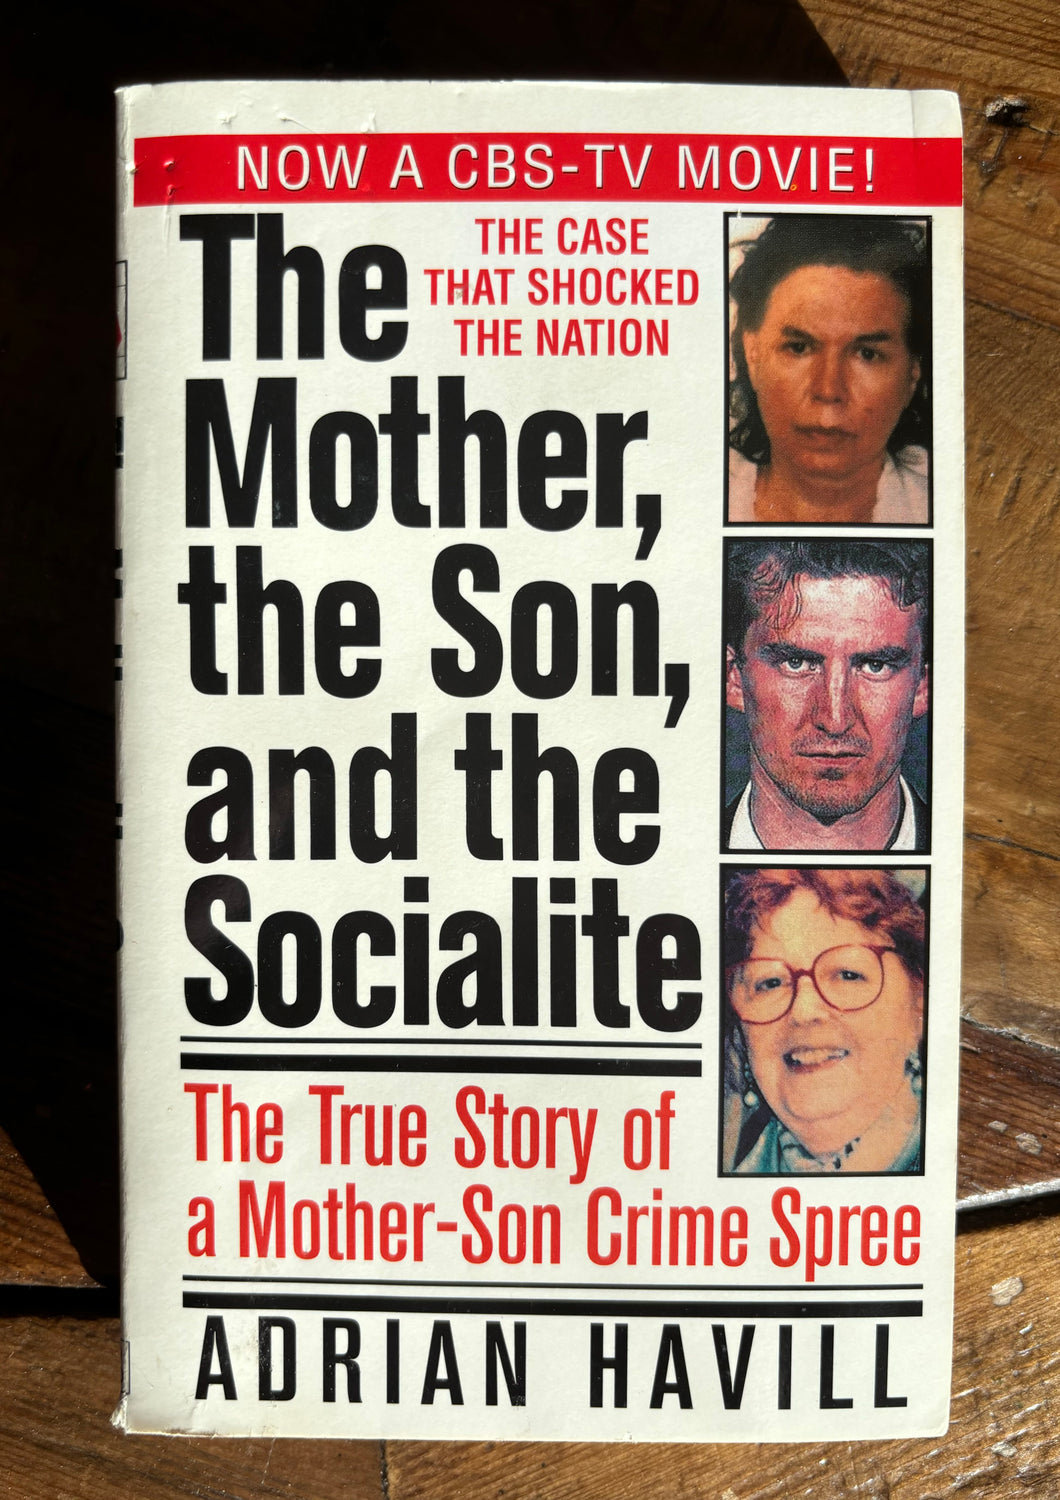 The Mother, the Son, and the Socialite